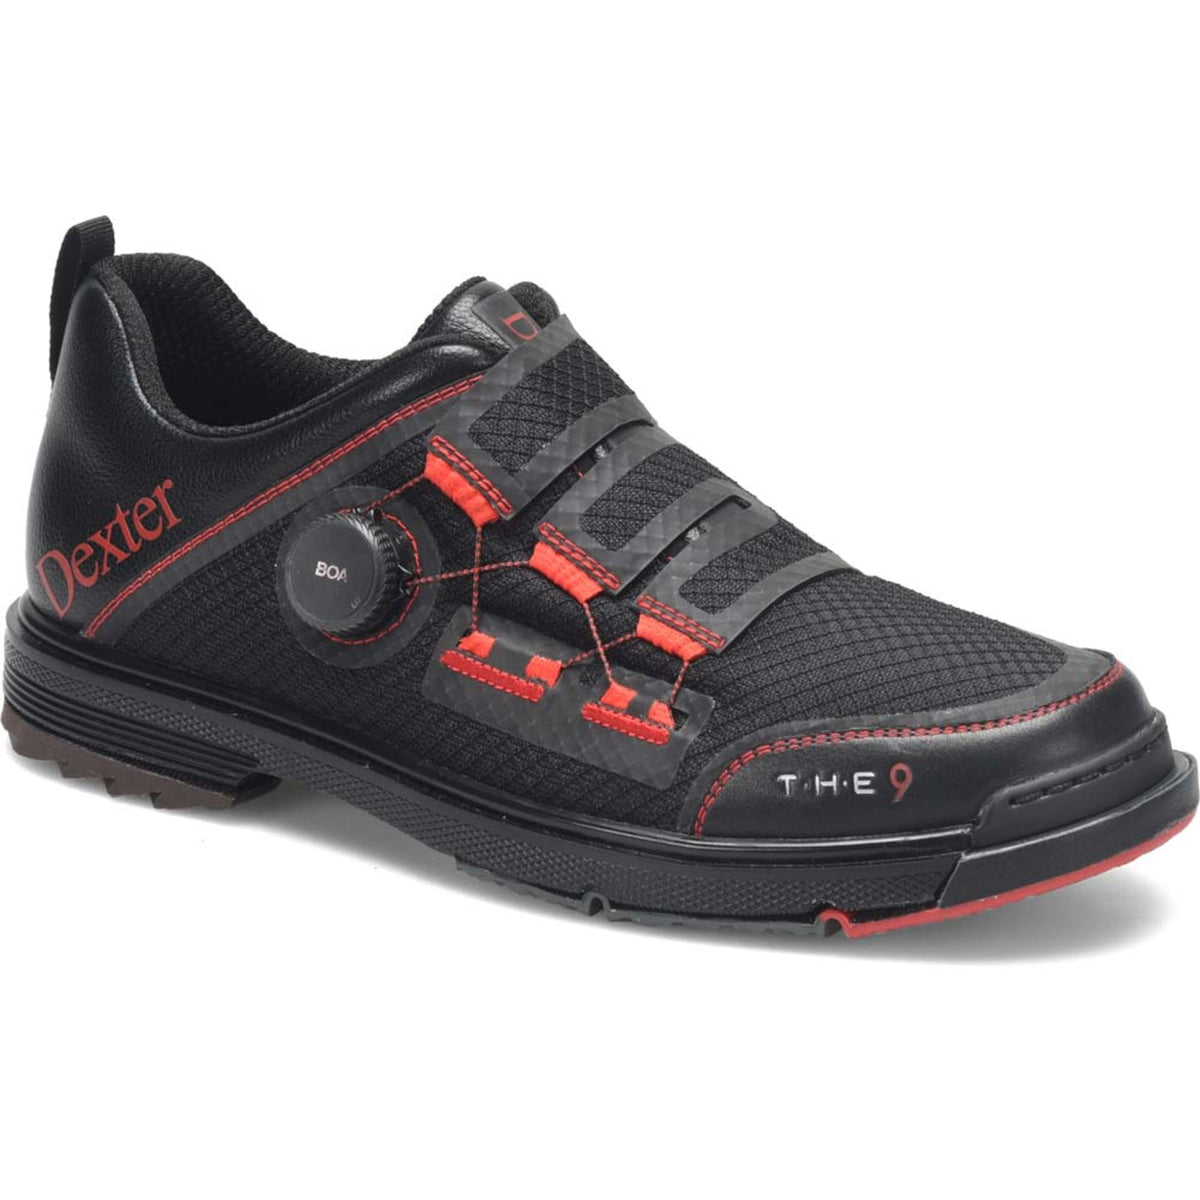 The 9 Stryker Boa Black/ Red Shoes